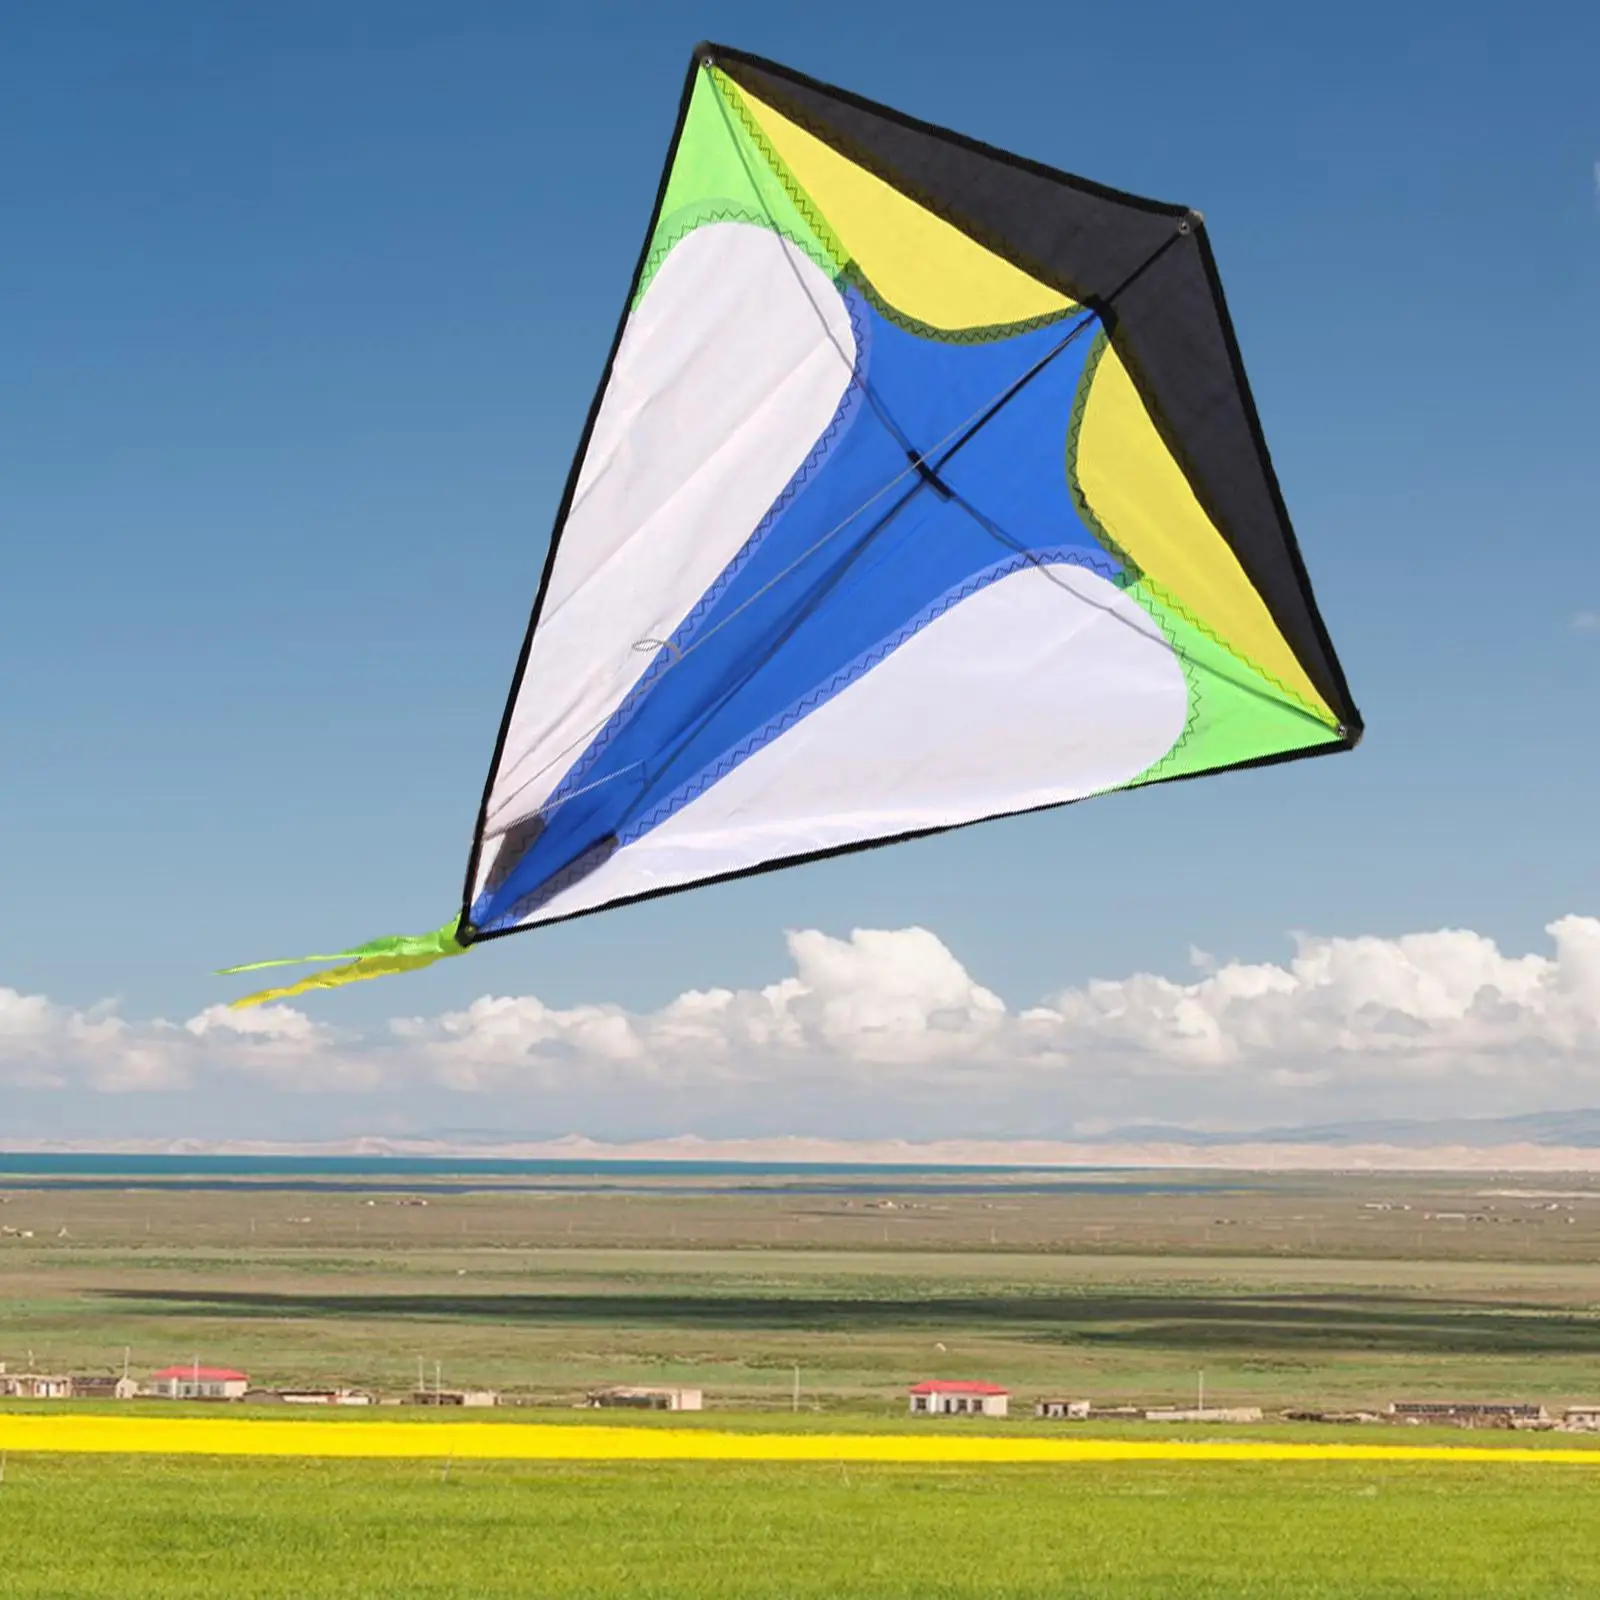 Rainbow Rhombus Kite Fly Kites Easy to Fly Easy to Assemble Durable with Tail Toys for Beginner Kids Adults Sports Trip